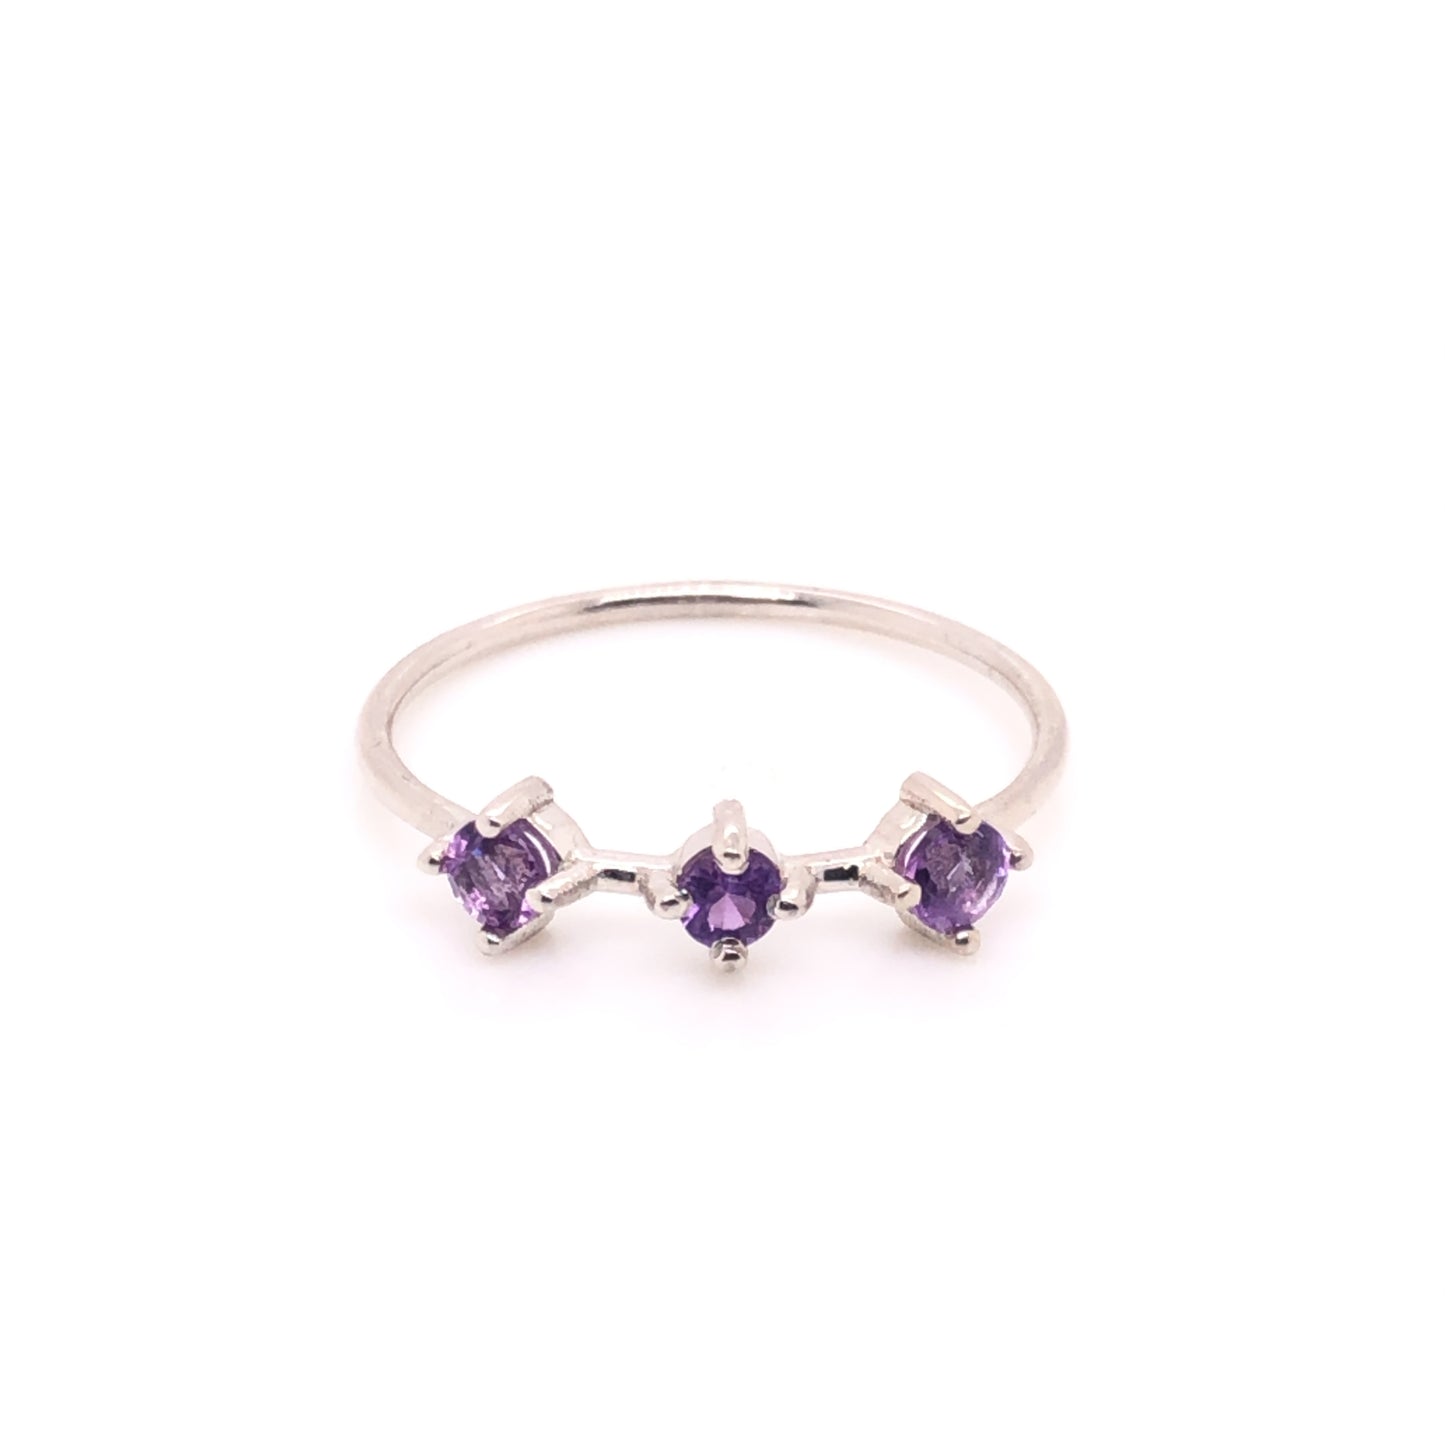 IMMEDIATE DELIVERY / Renata Ring with Amethysts / 14k White Gold / Size 7.25